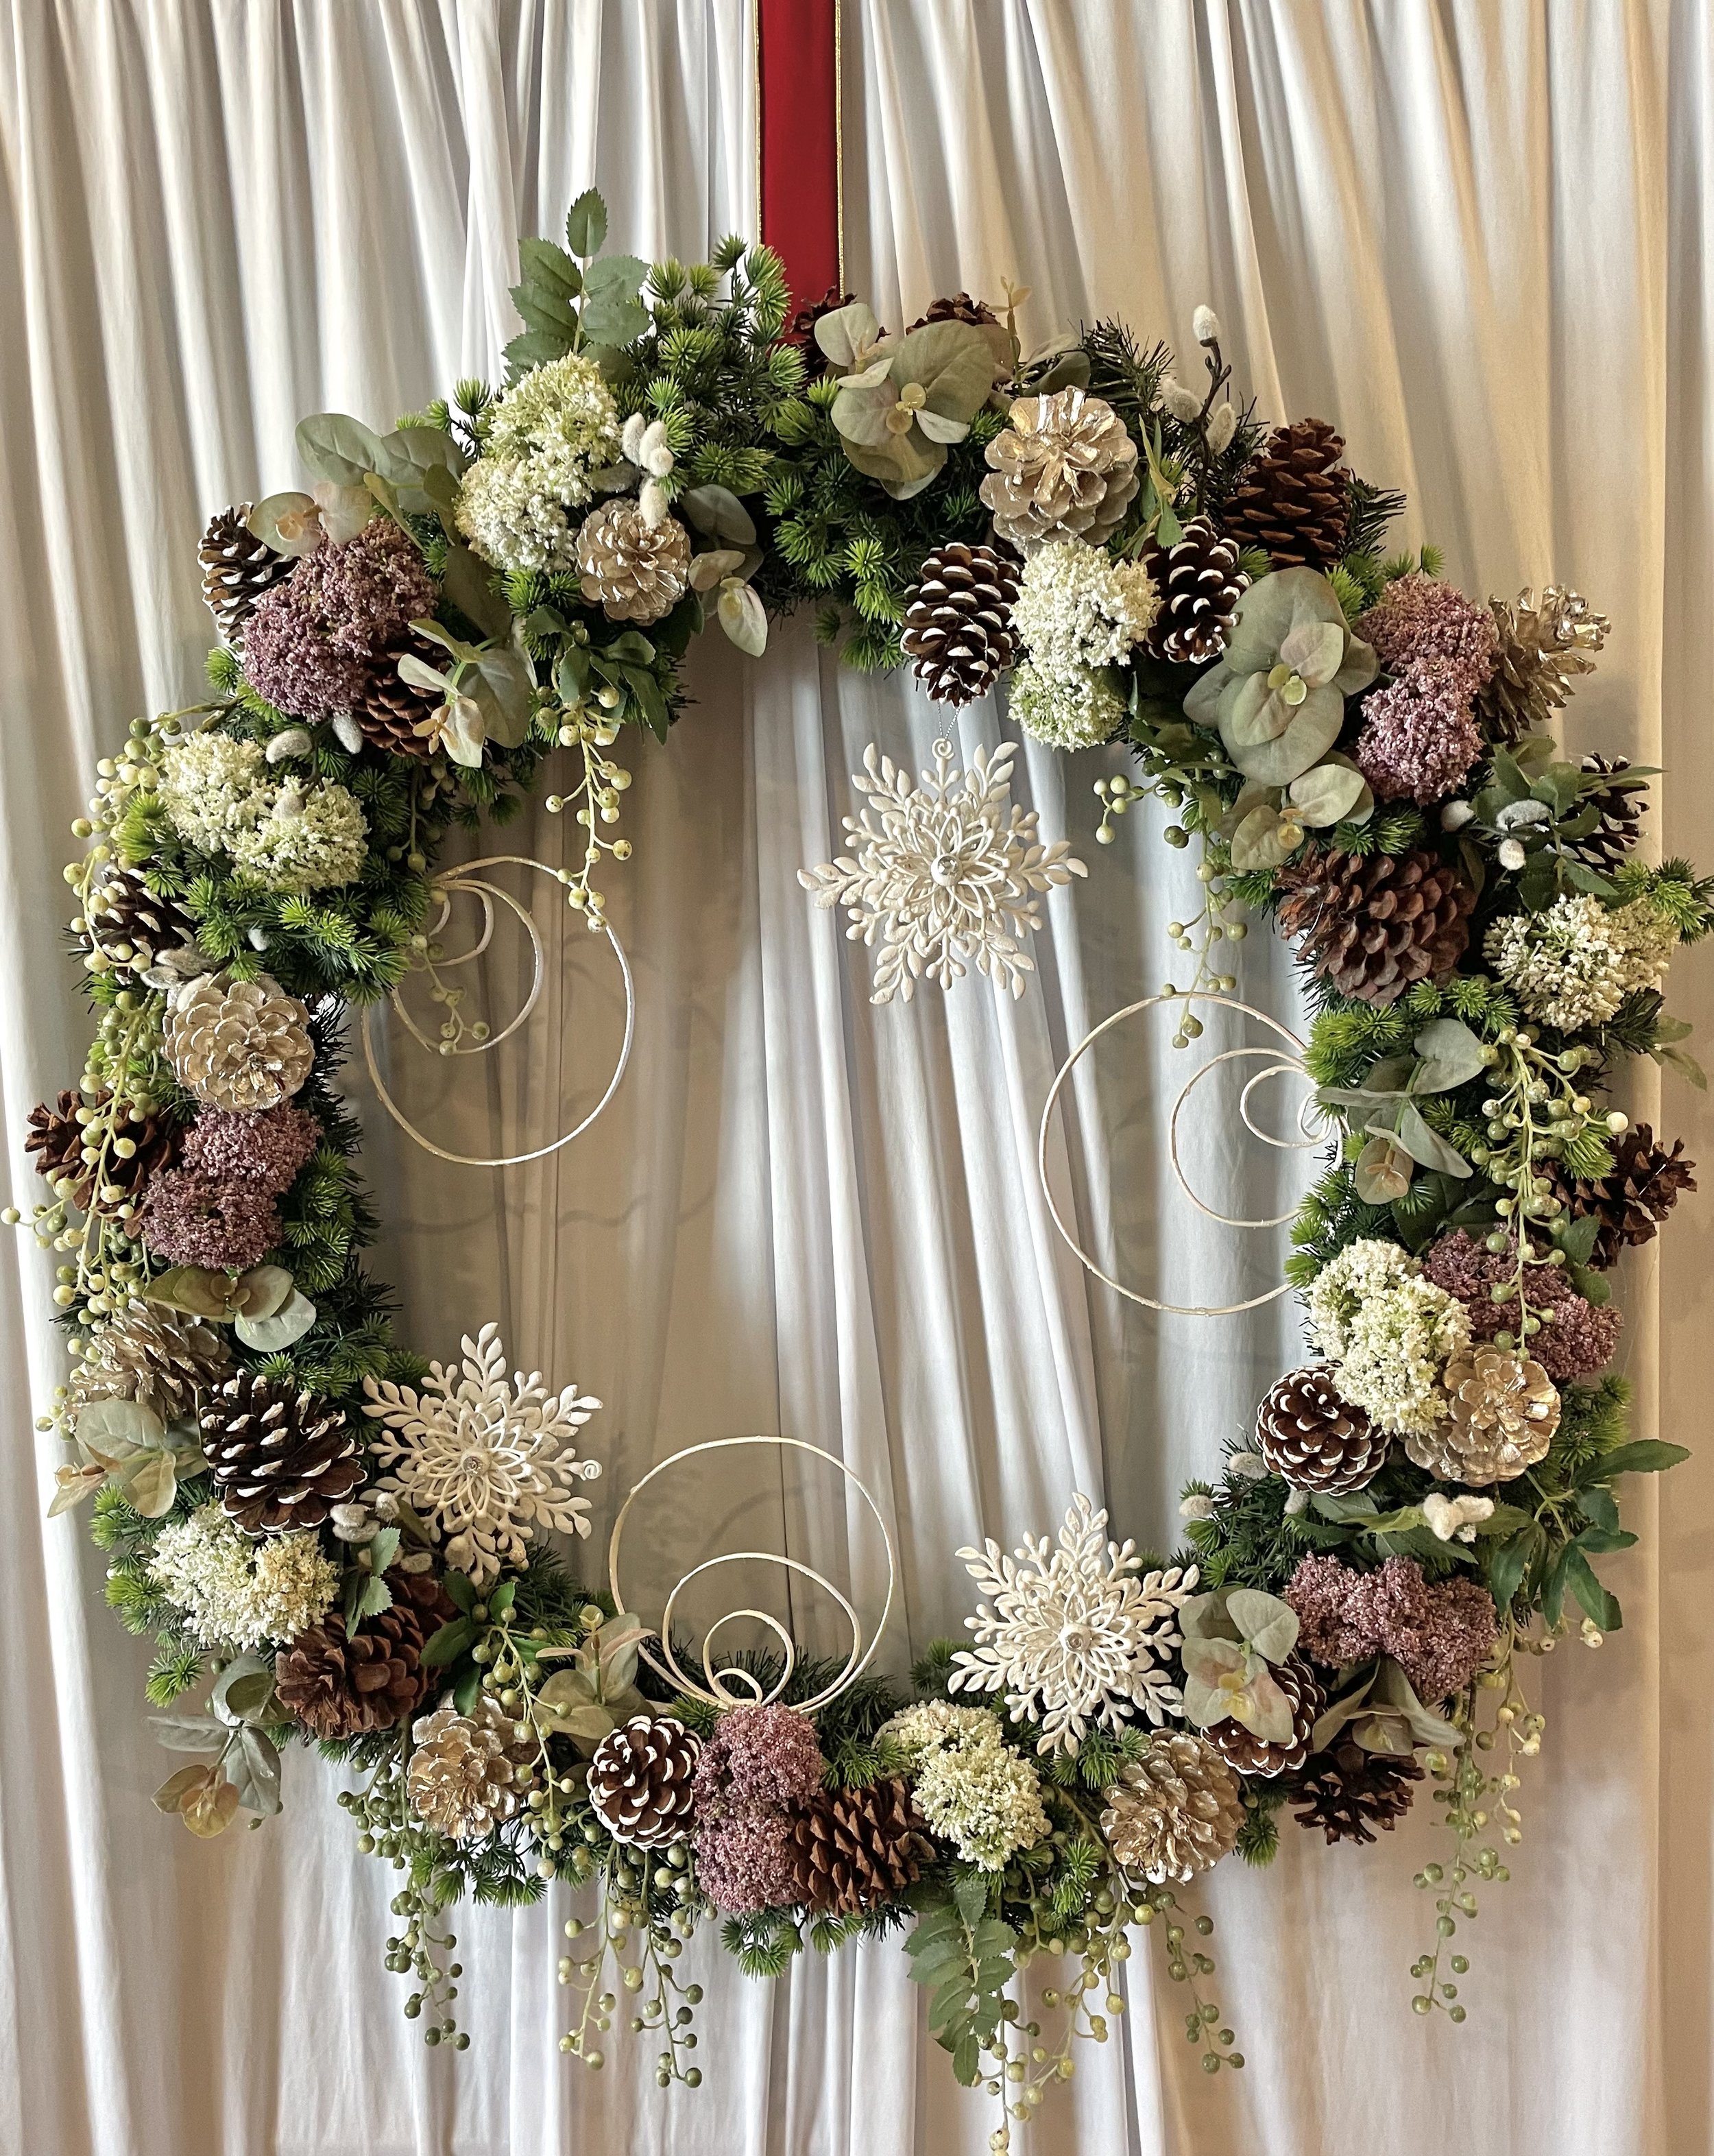 Alexis Shows Us How to Make Dreamy Transitional and Whimsical Christmas Wreaths